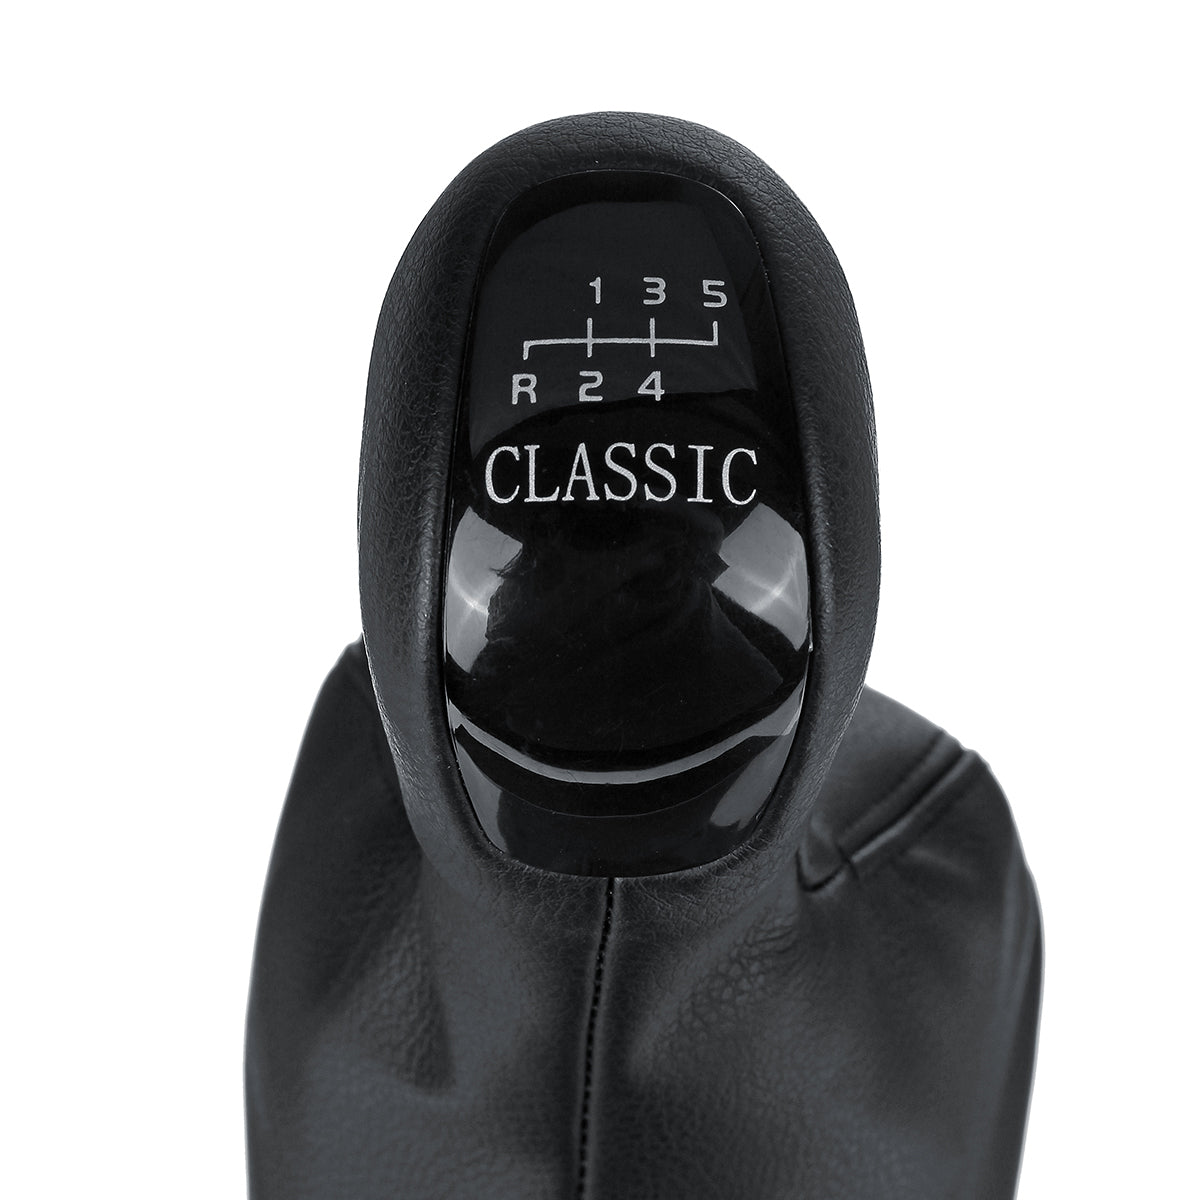 Black 5/6 Speed Gear Shift Knob PU Leather Gaitor Boot Cover For Mercedes Benz C Class W203